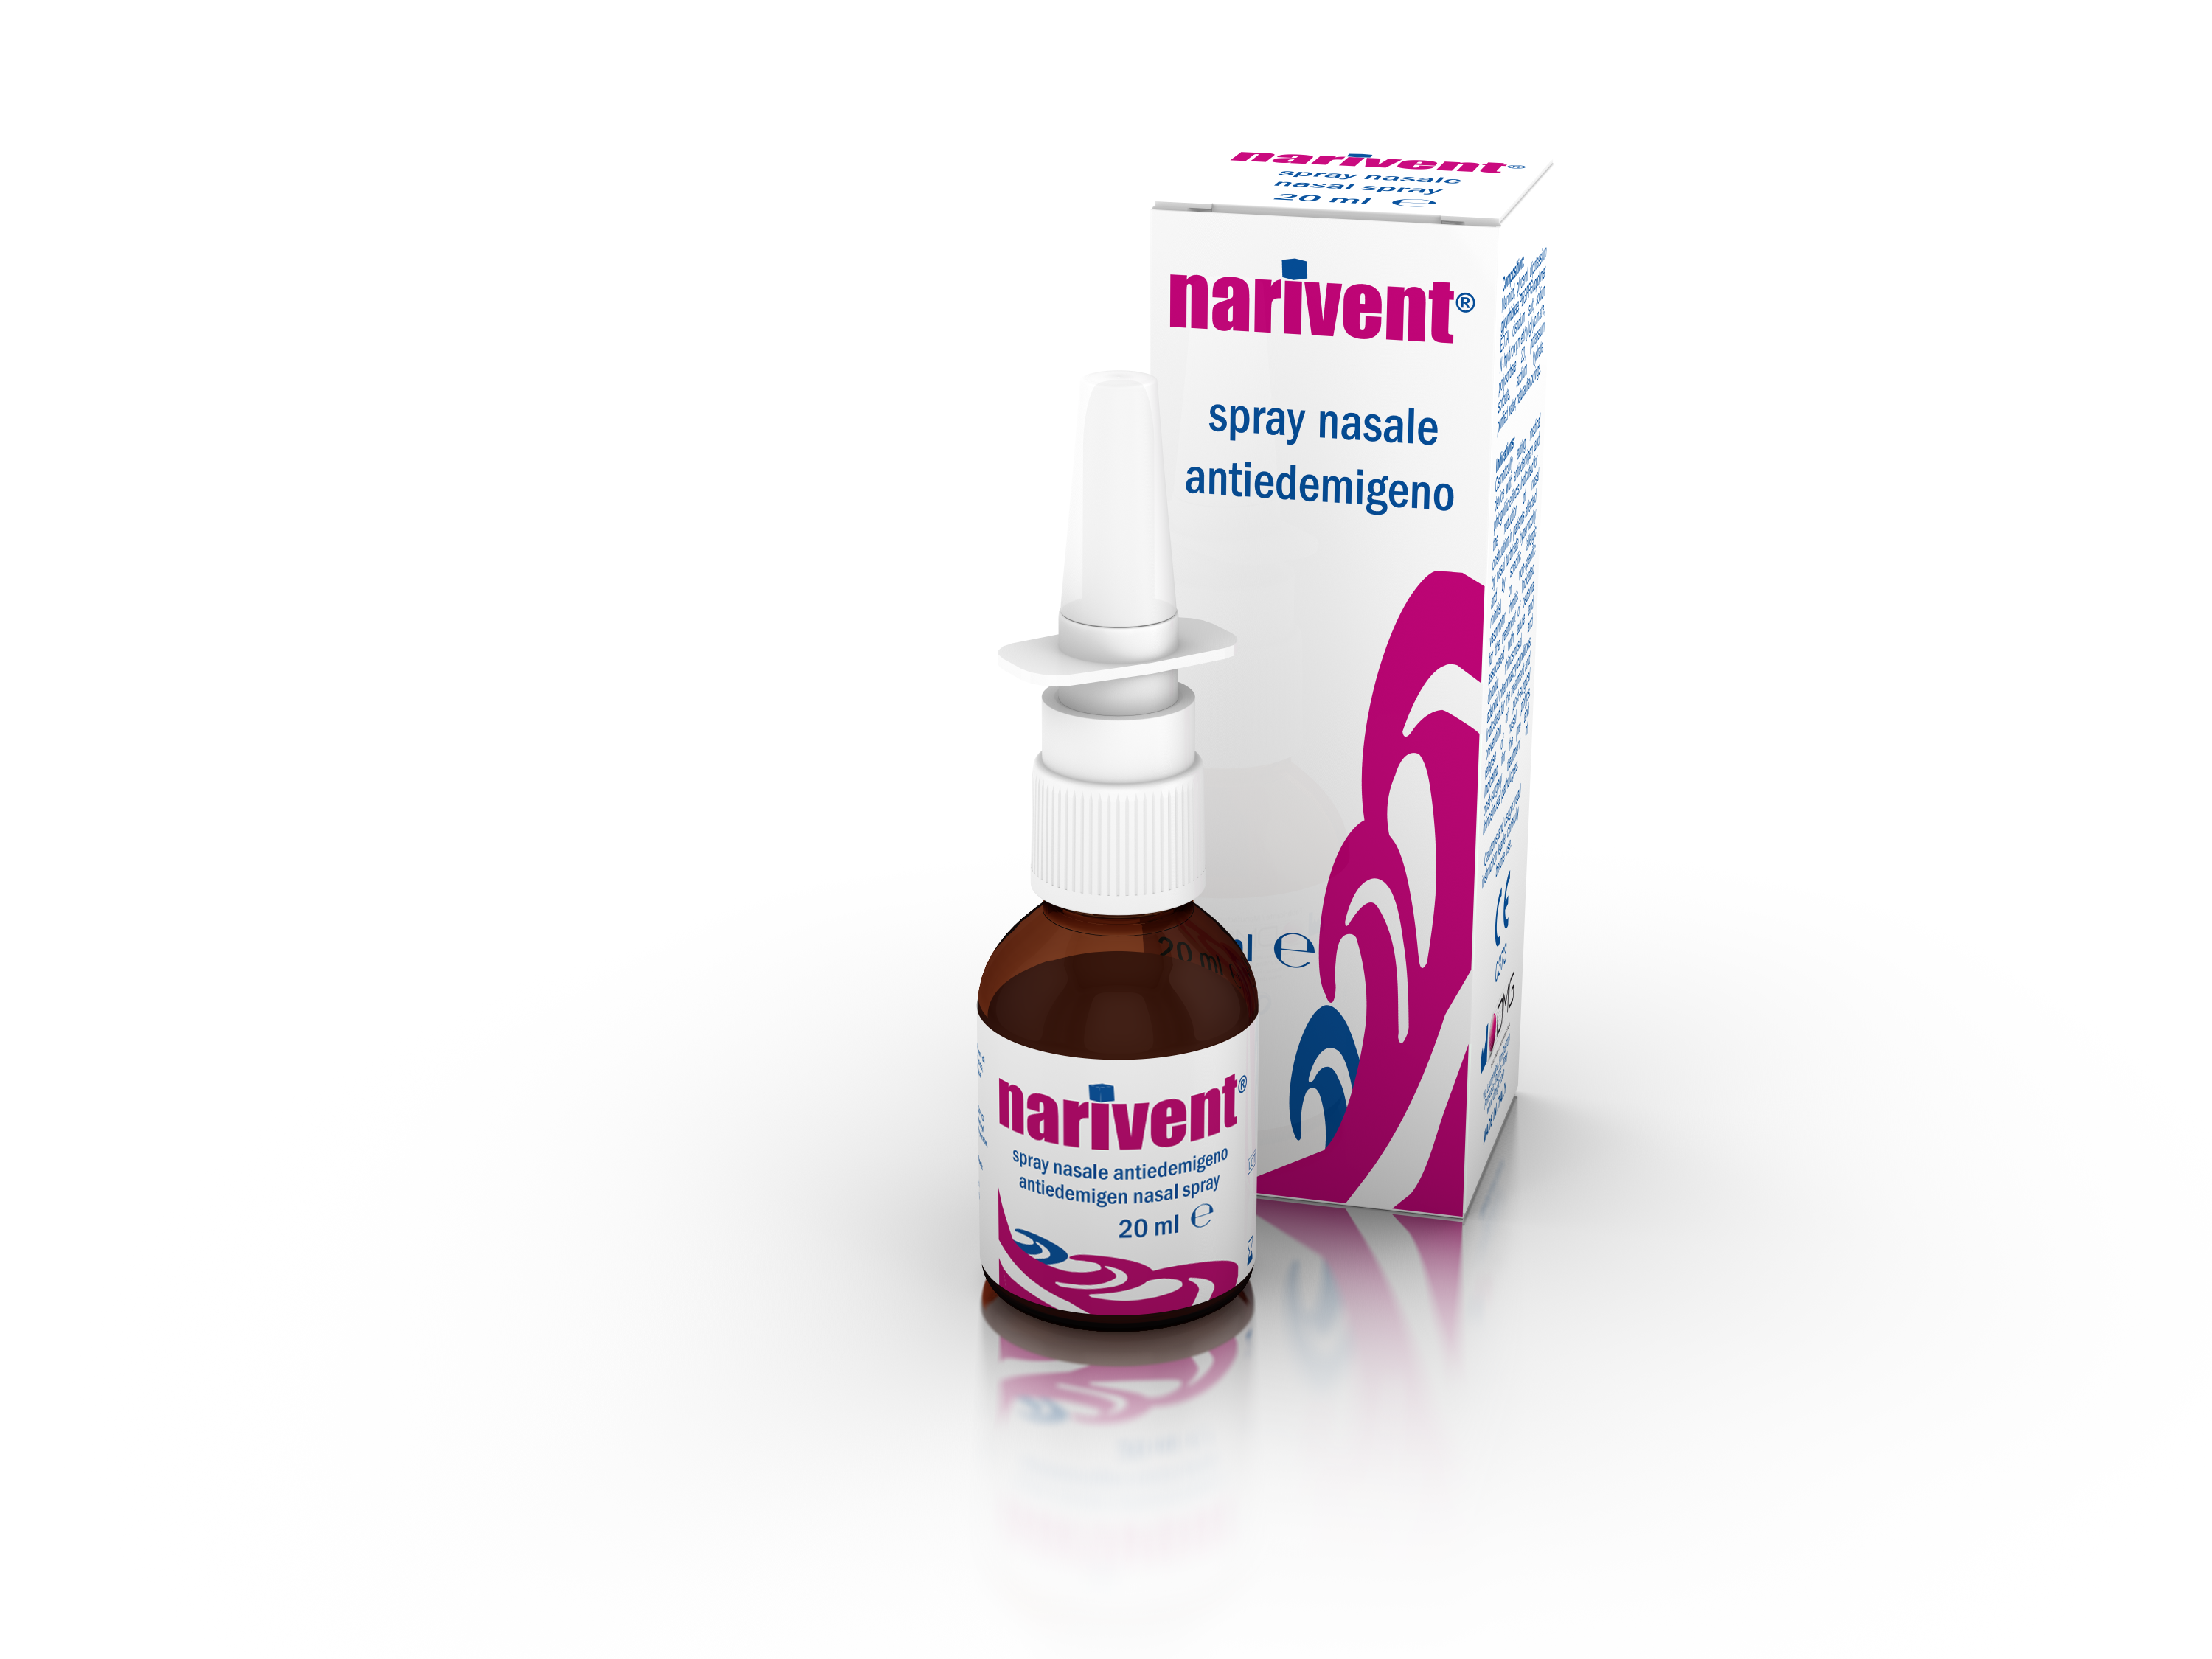 NARIVENT SPRAY - A new direction in the treatment of Inflammation - Antiedemigen Nasal Spray